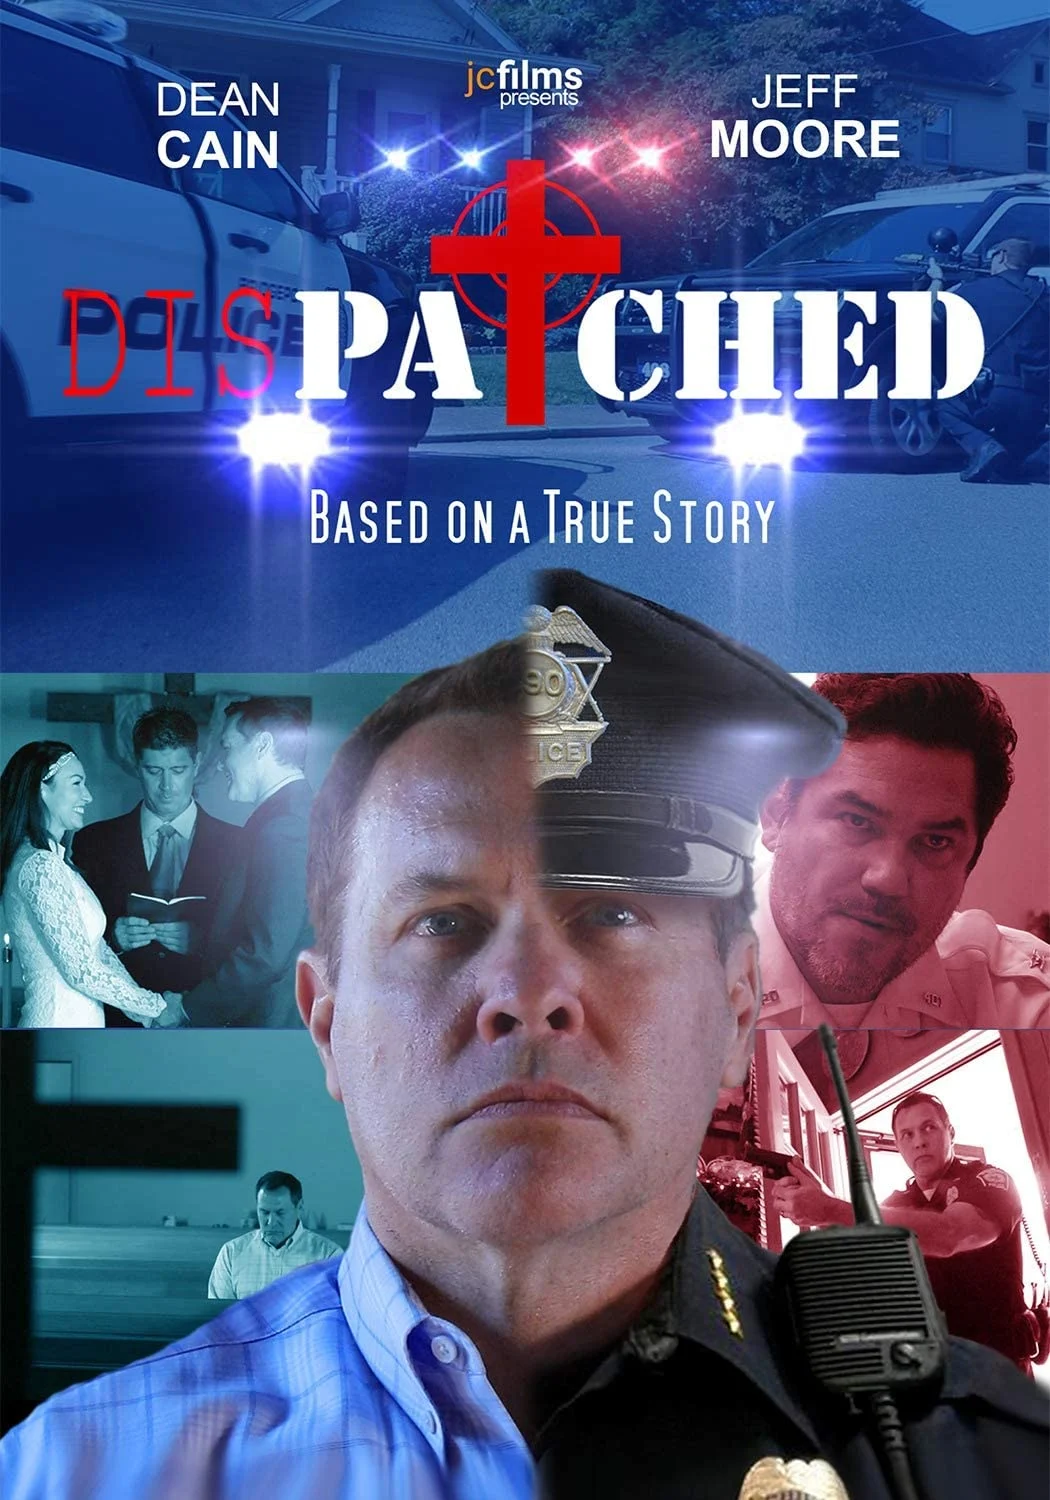 Dispatched (DVD) (MOD)